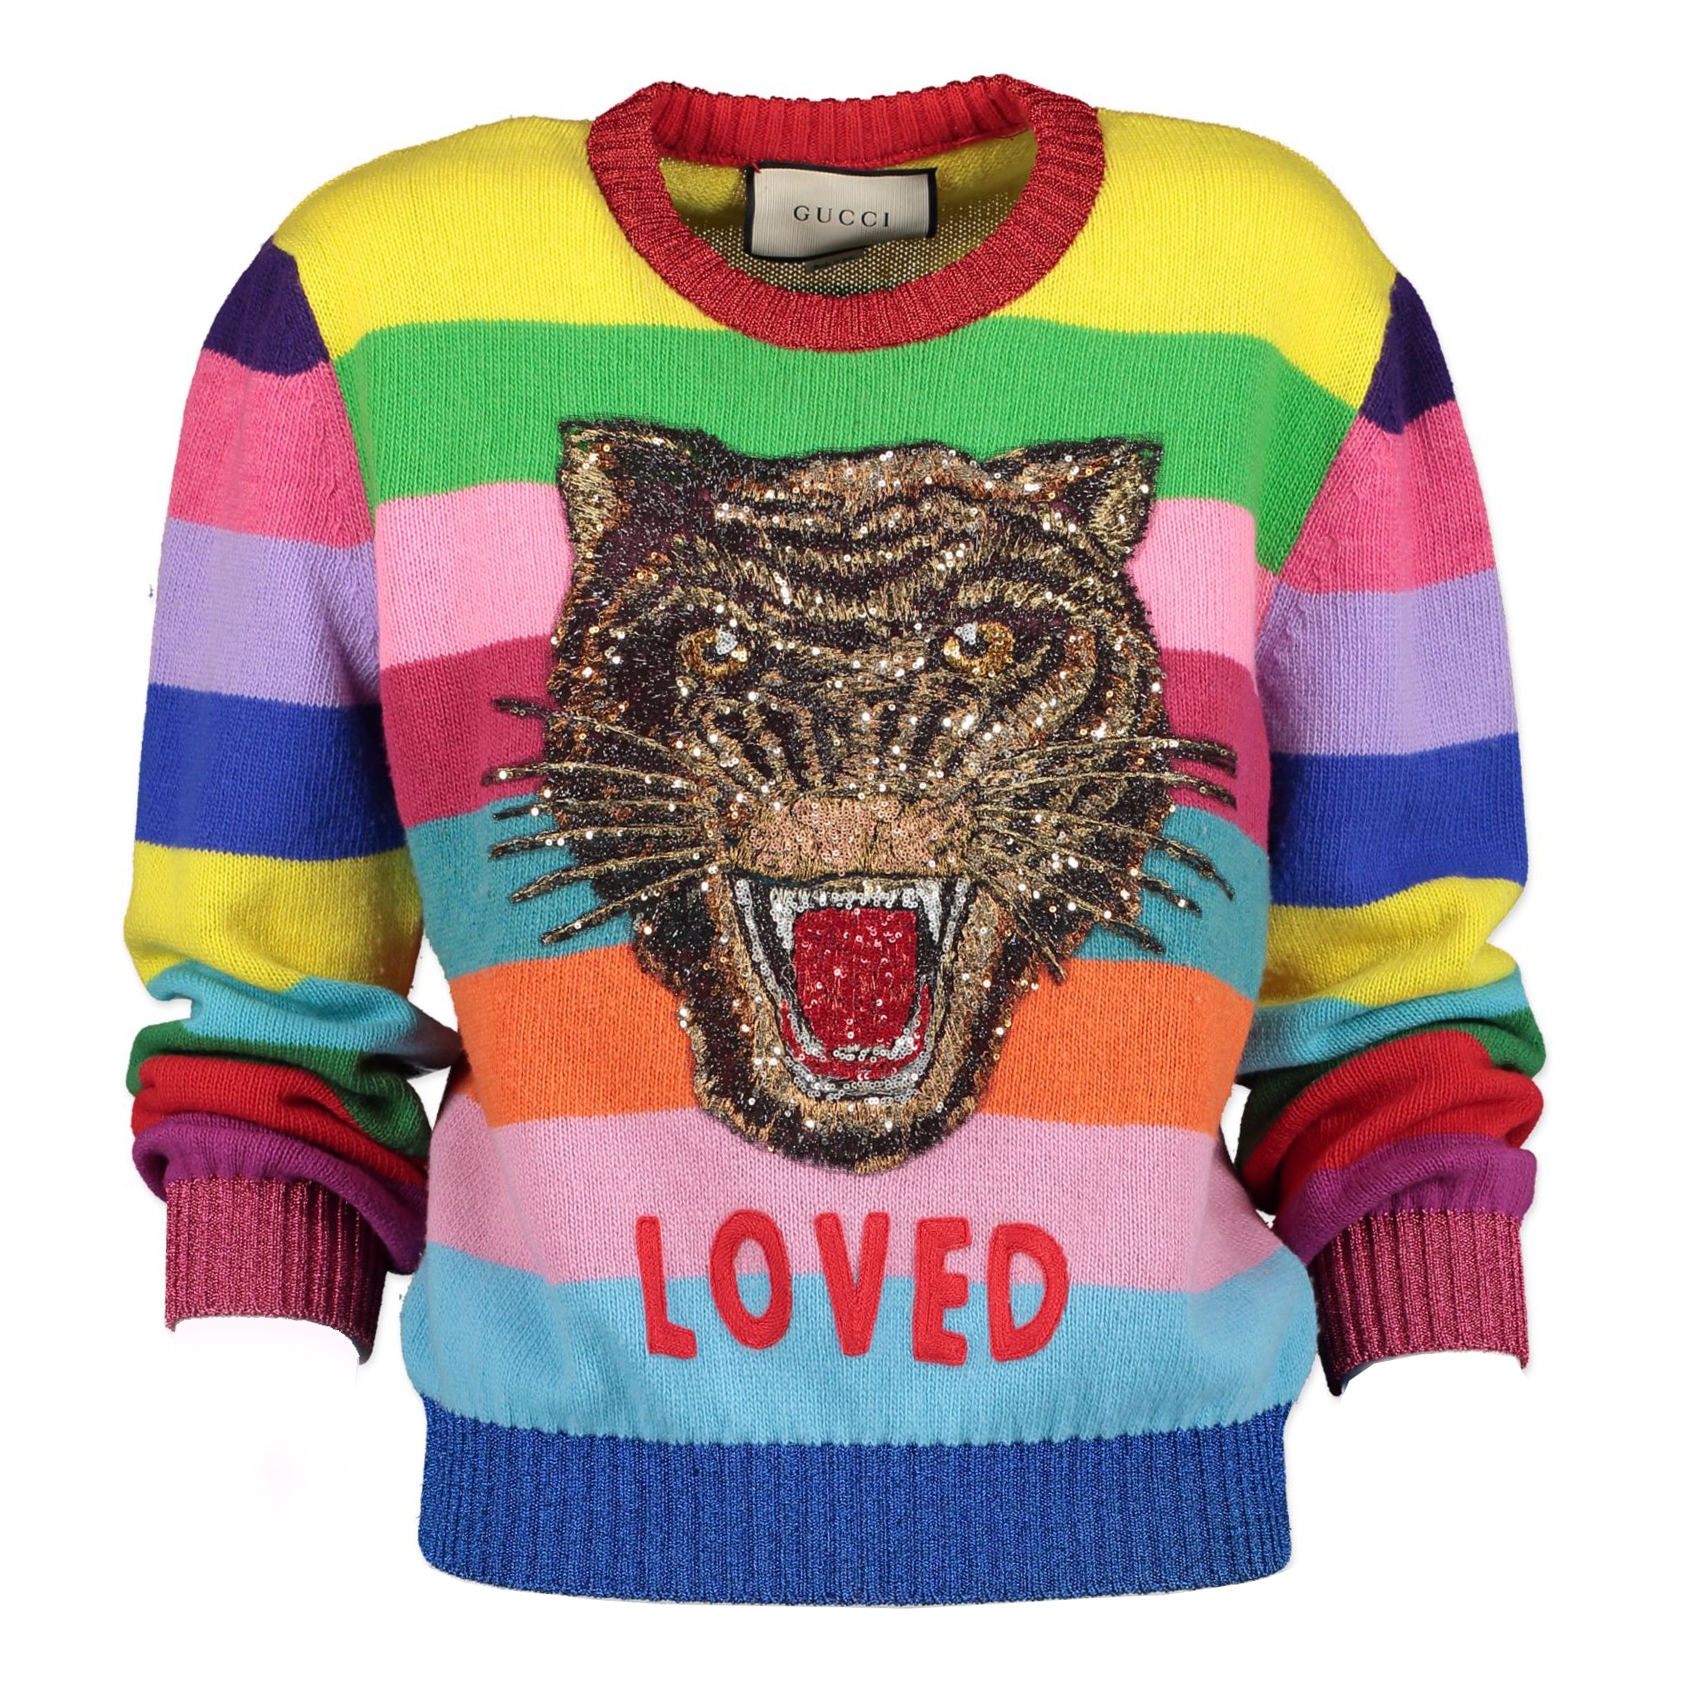 Gucci Rainbow Tiger Sweater - M ○ ○ Buy Sell Authentic